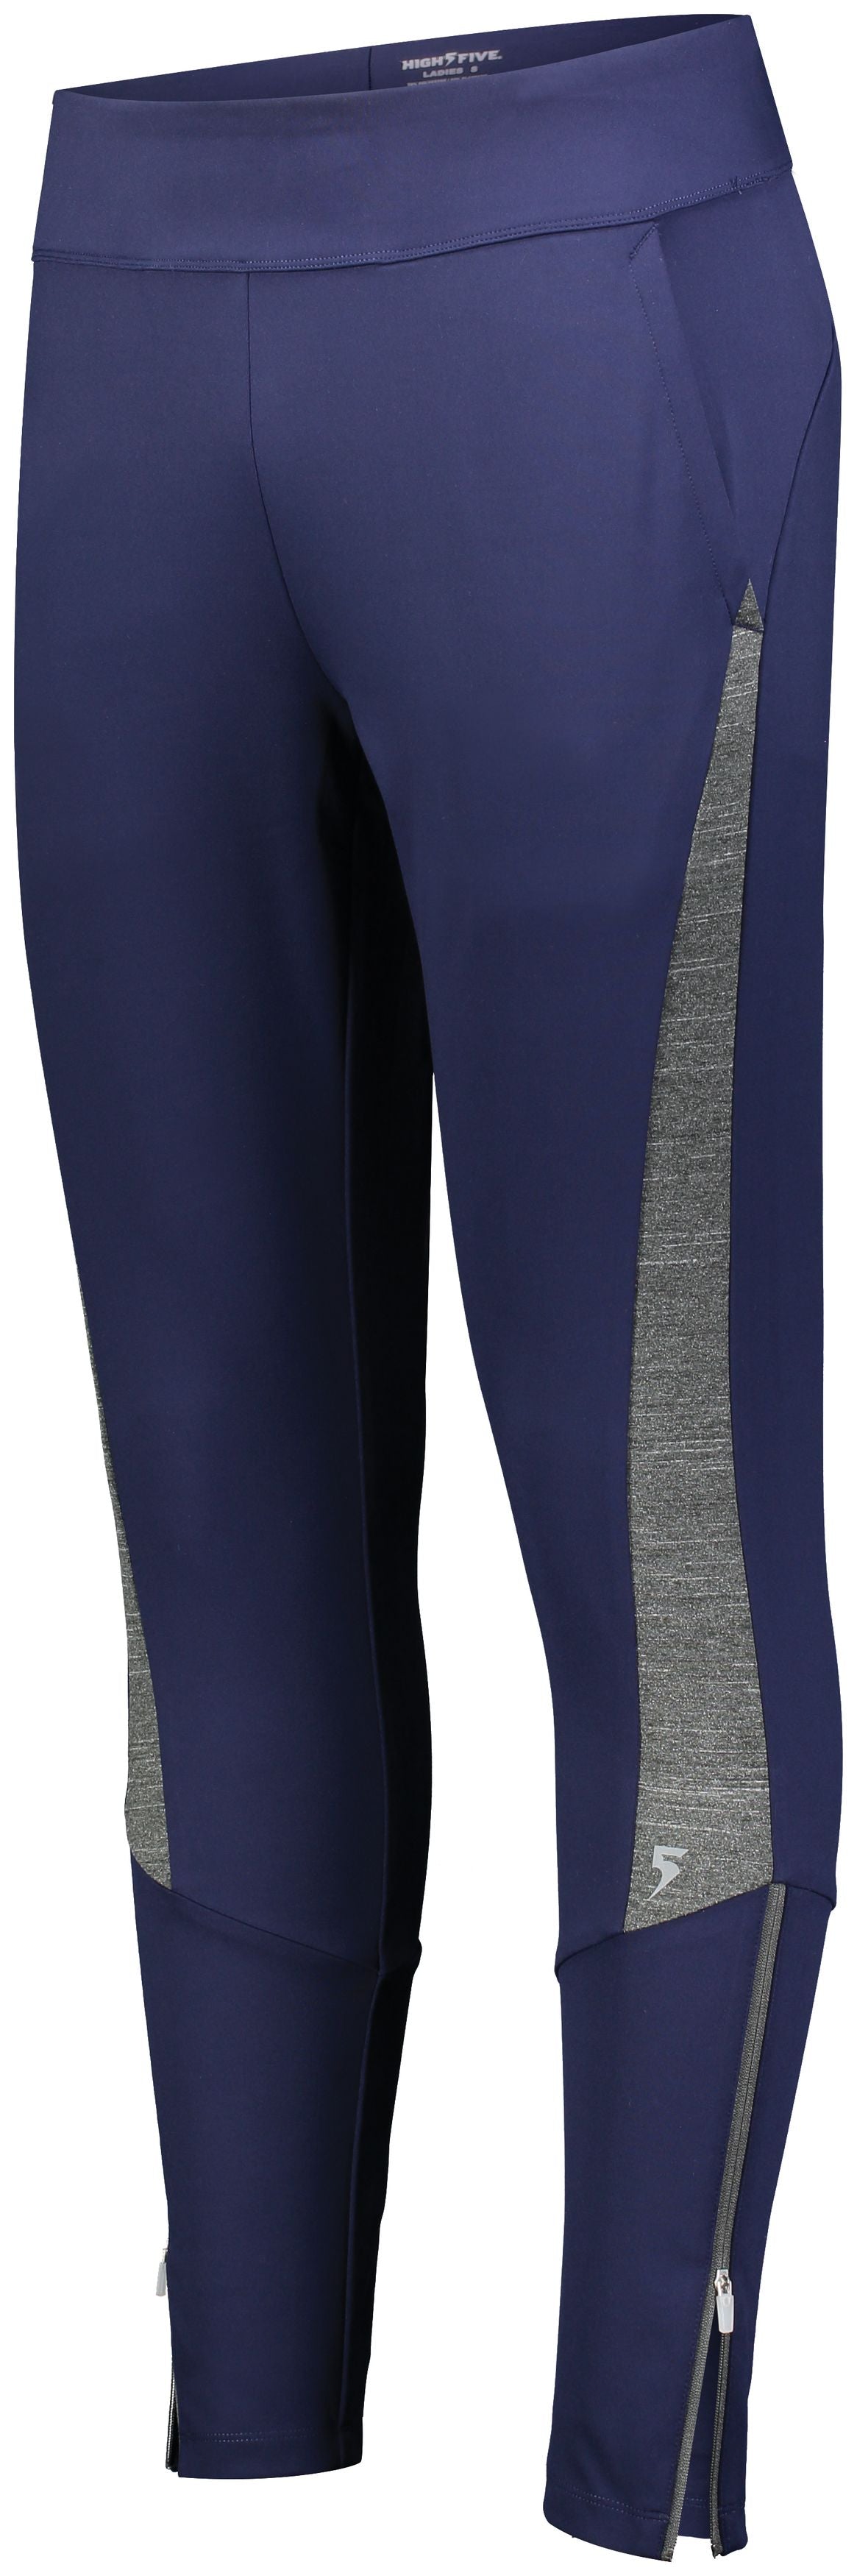 High 5 Girls Free Form Pant in Navy/Carbon Heather  -Part of the Girls, Pants, High5-Products, Girls-Pants product lines at KanaleyCreations.com